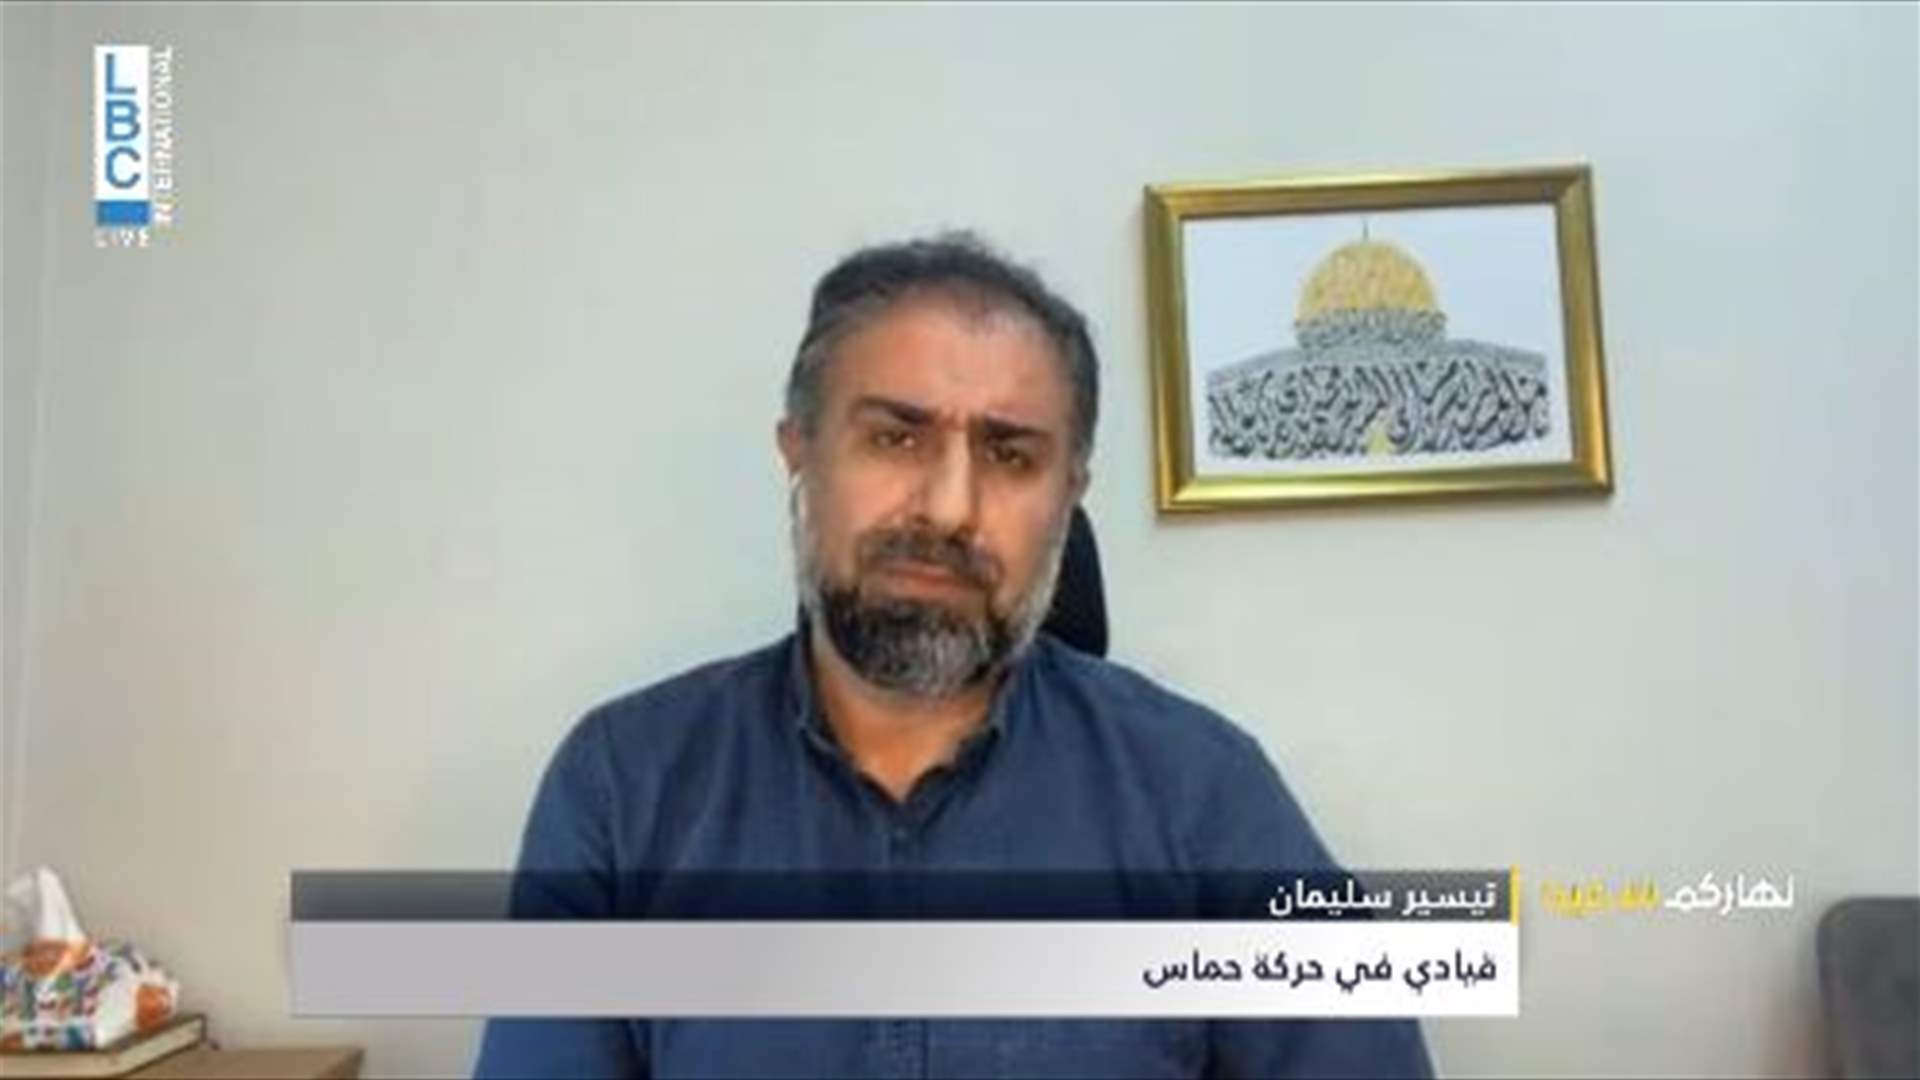 Taysir Suleiman to LBCI: We are now facing a genocidal operation